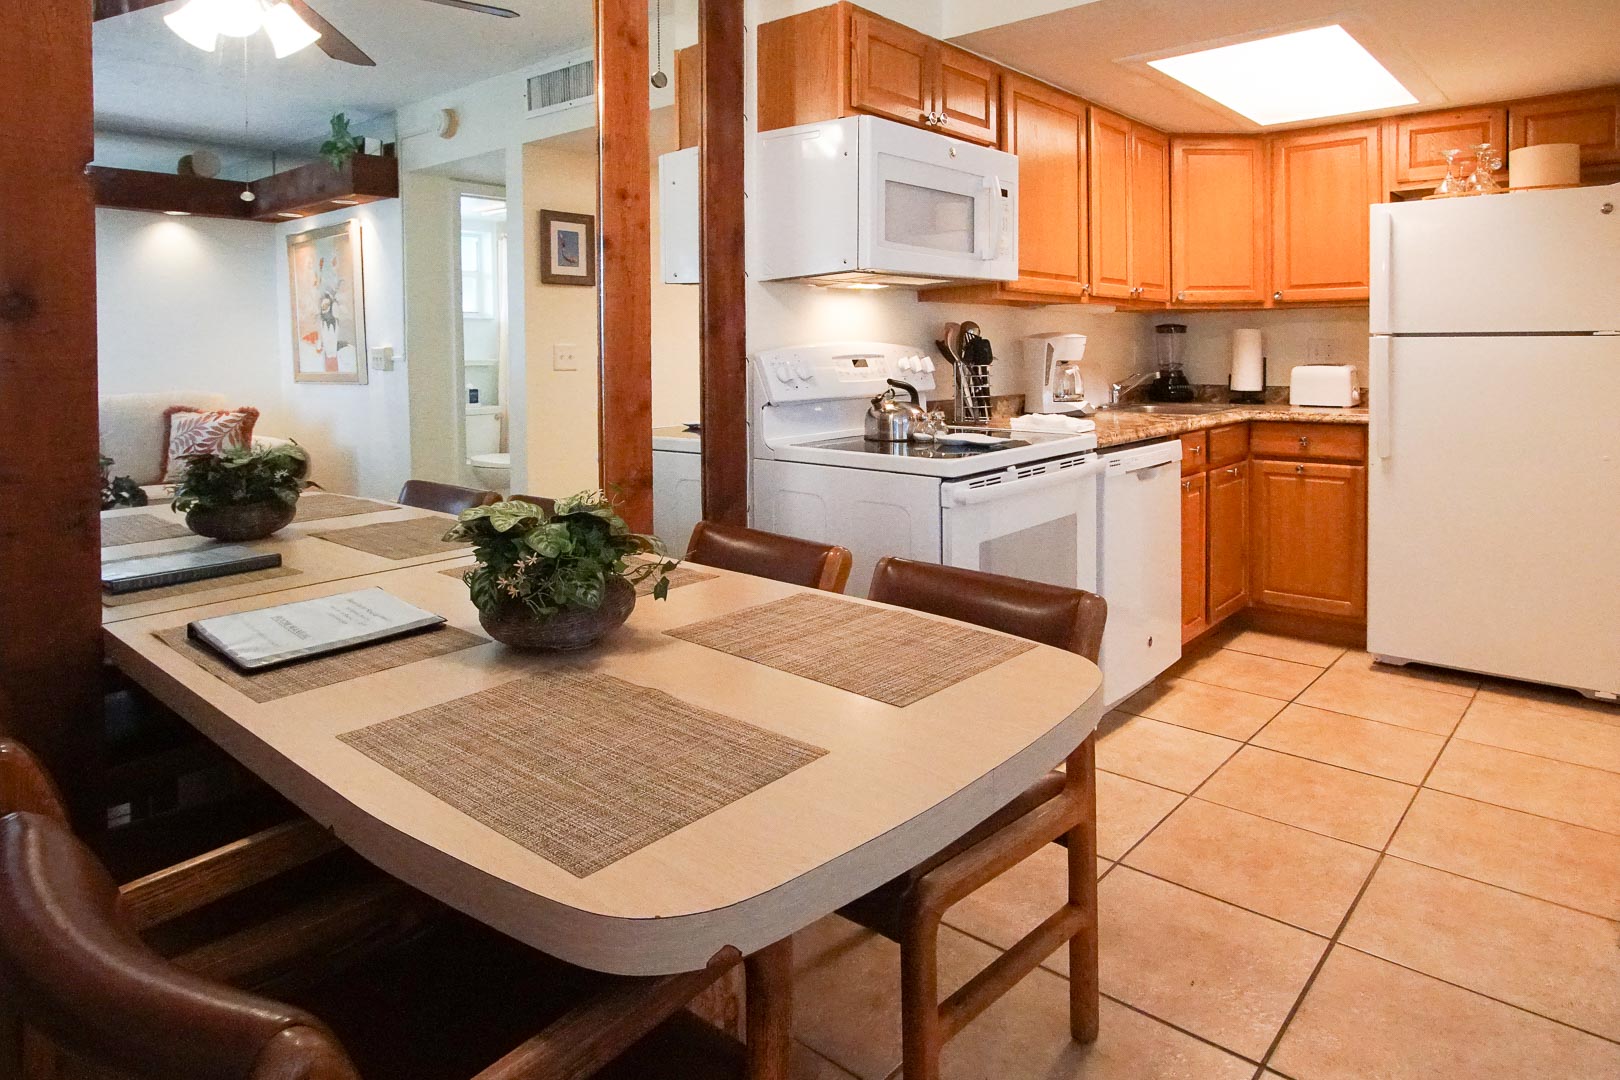 A spacious kitchen area at VRI's Sand Dune Shores in Florida.